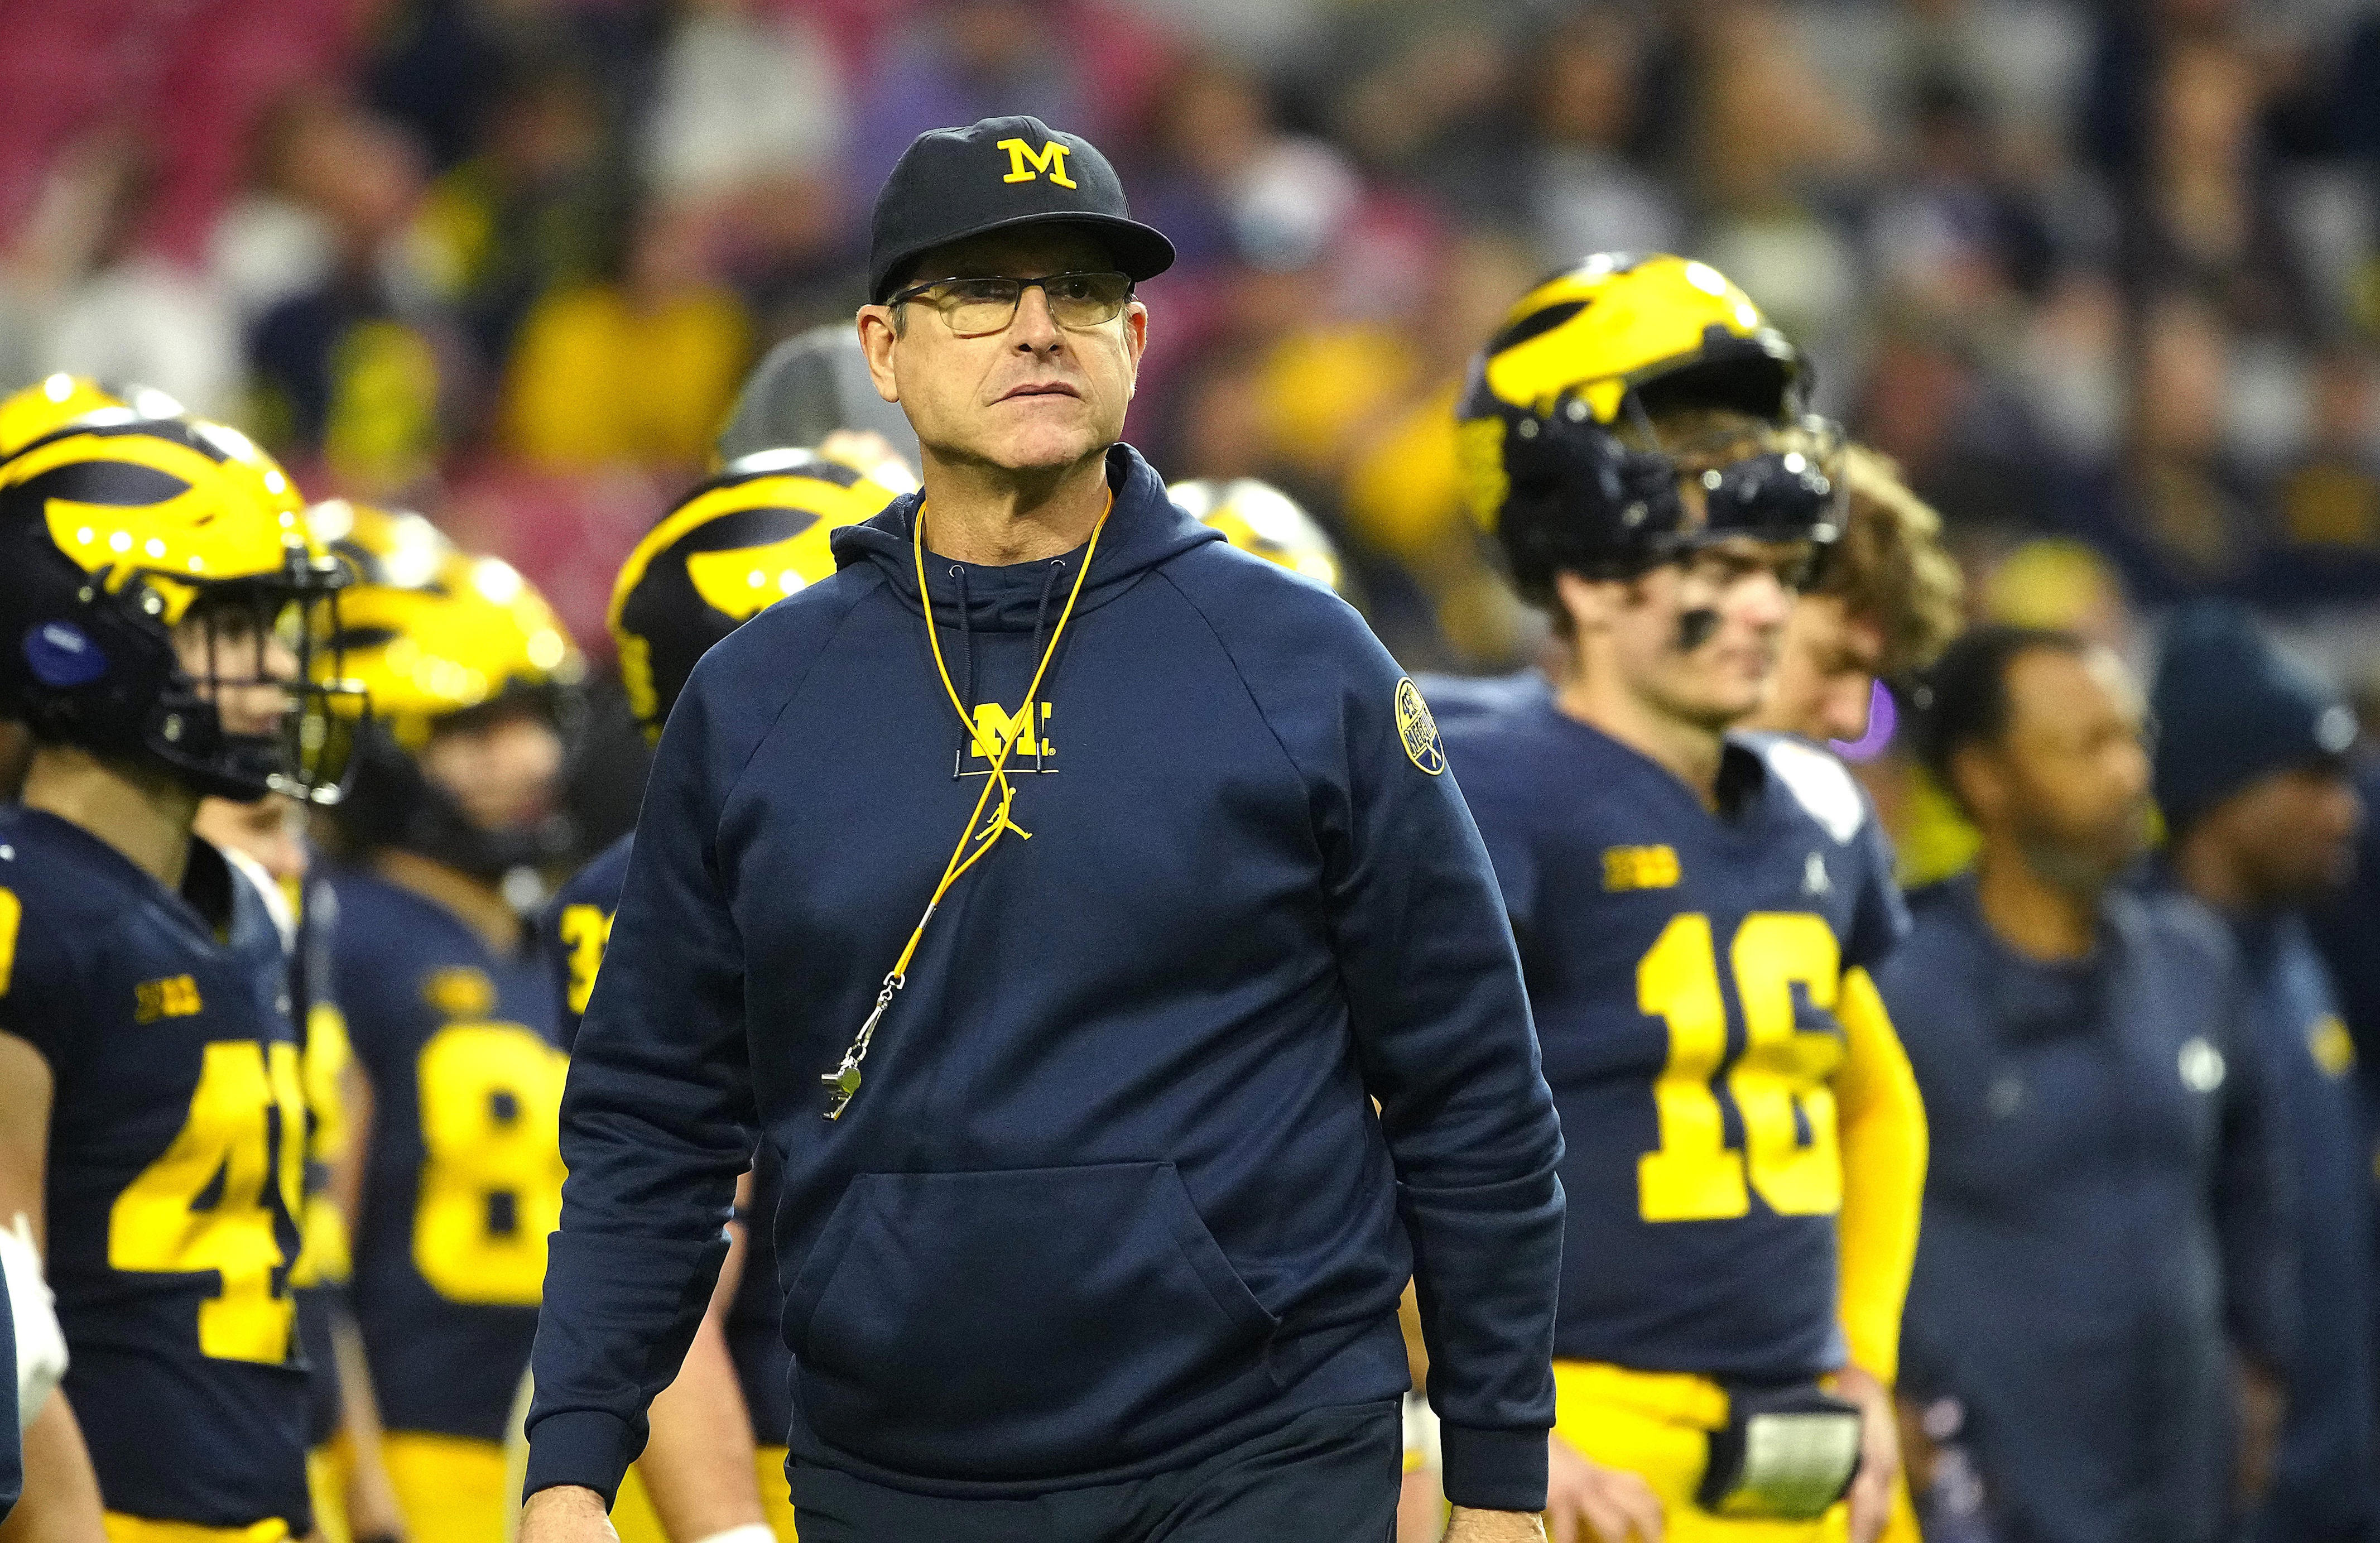 ohio state gives michigan football a chance to prove it's winning on its own merit